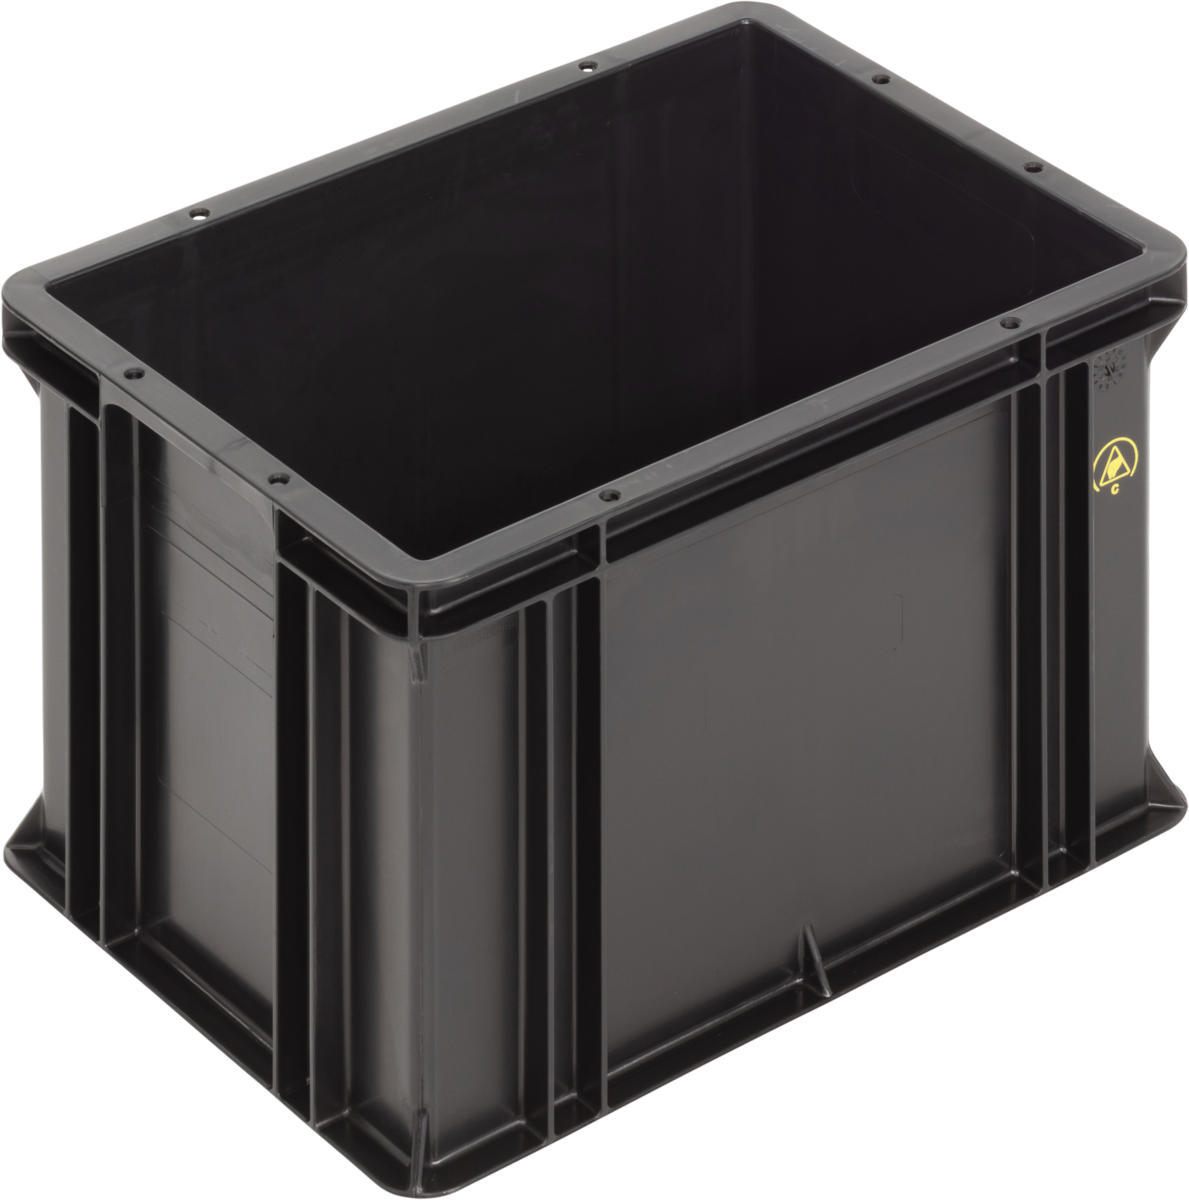 Anti-Static-ESD-Antistatic-ESD-Safe-SGL-Norm-Stacking-Bin-Containers-Flat-Base-Ref.-4326.007.992_1004402_400x300x278_01